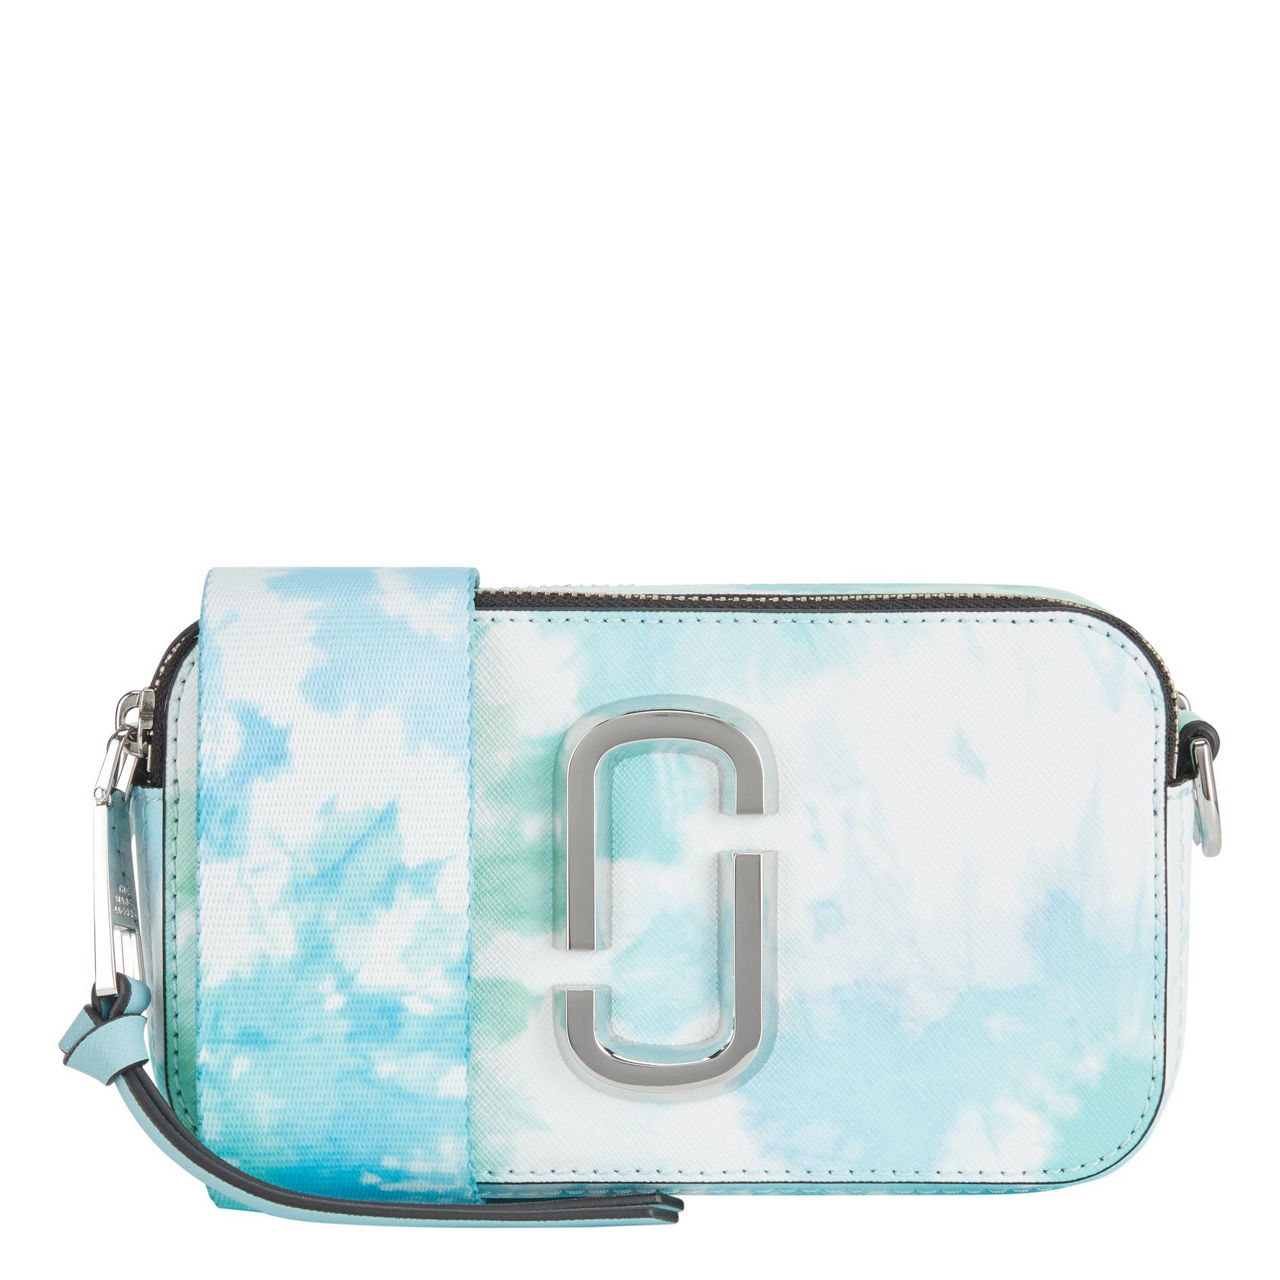 The Tie Dye Snapshot Marc Jacobs bag in saffiano leather